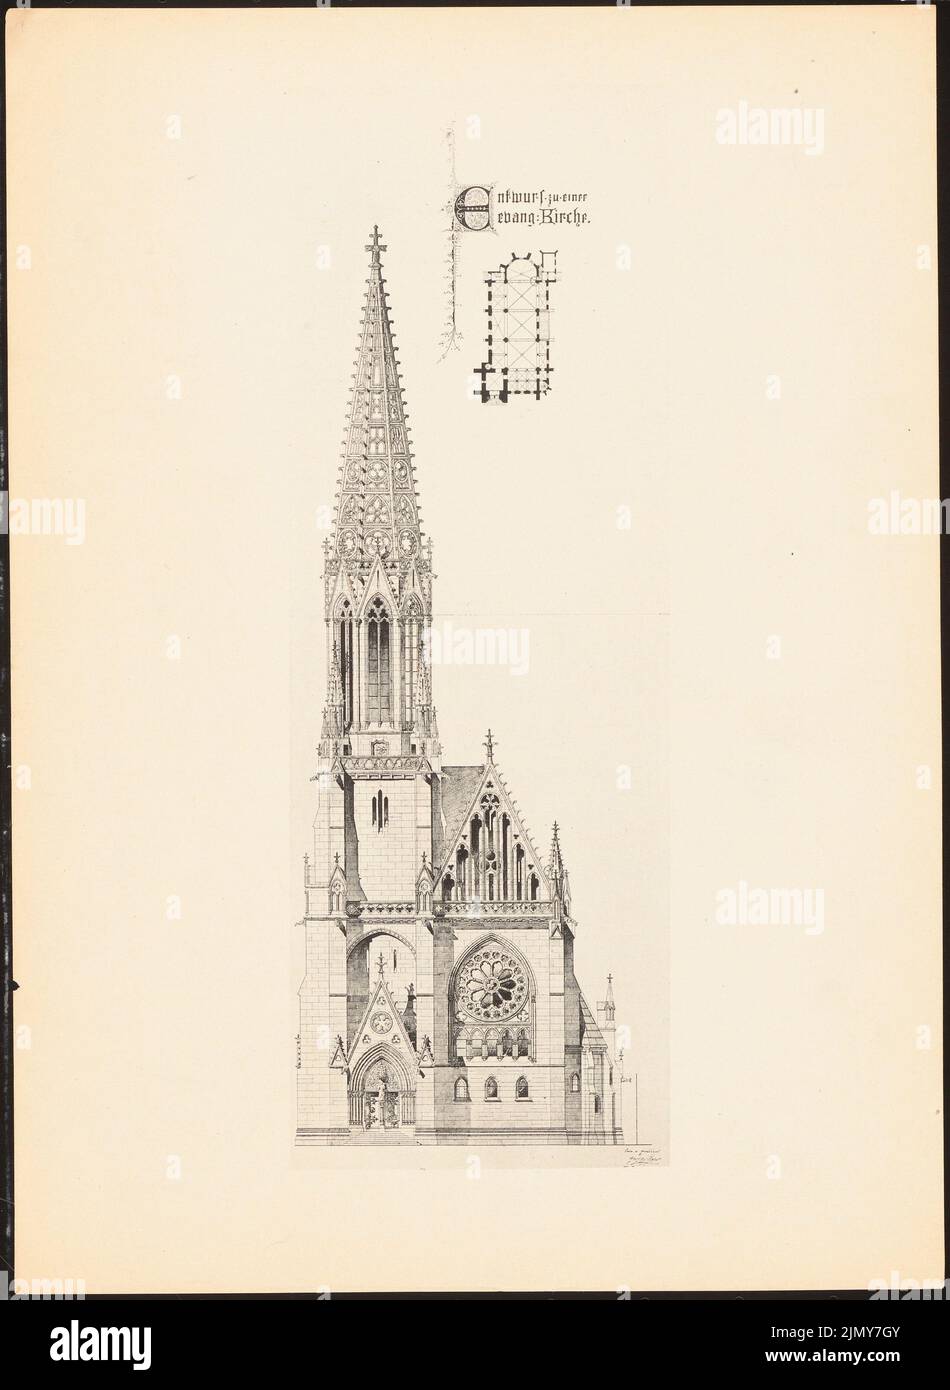 Caro Georg, Evangelical Church. (From: Prints of seminar works by the Royal Technical University of Berlin, Vol. I) (1890-1902): floor plan, view. Print on paper, 33.3 x 24.4 cm (including scan edges) Stock Photo